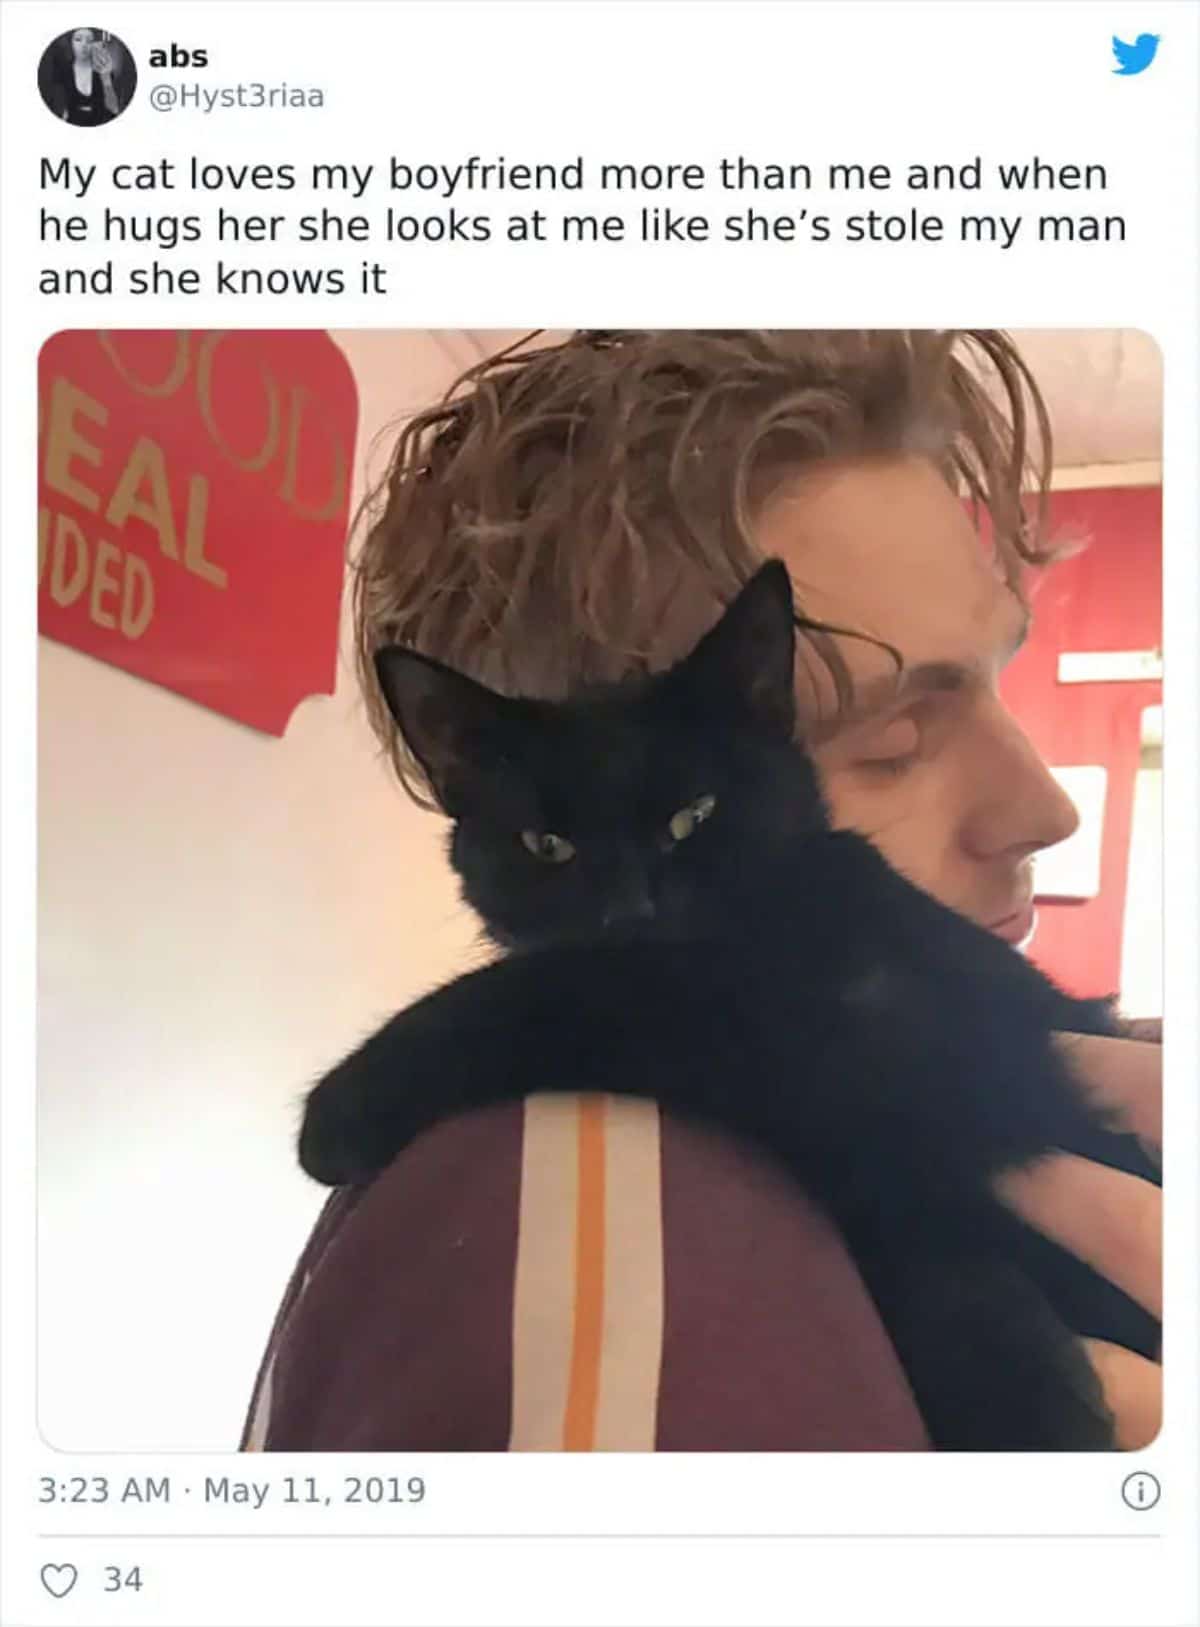 tweet with a photo showing a black cat gtting hugged by a man with the cat's head resting on his shoulder